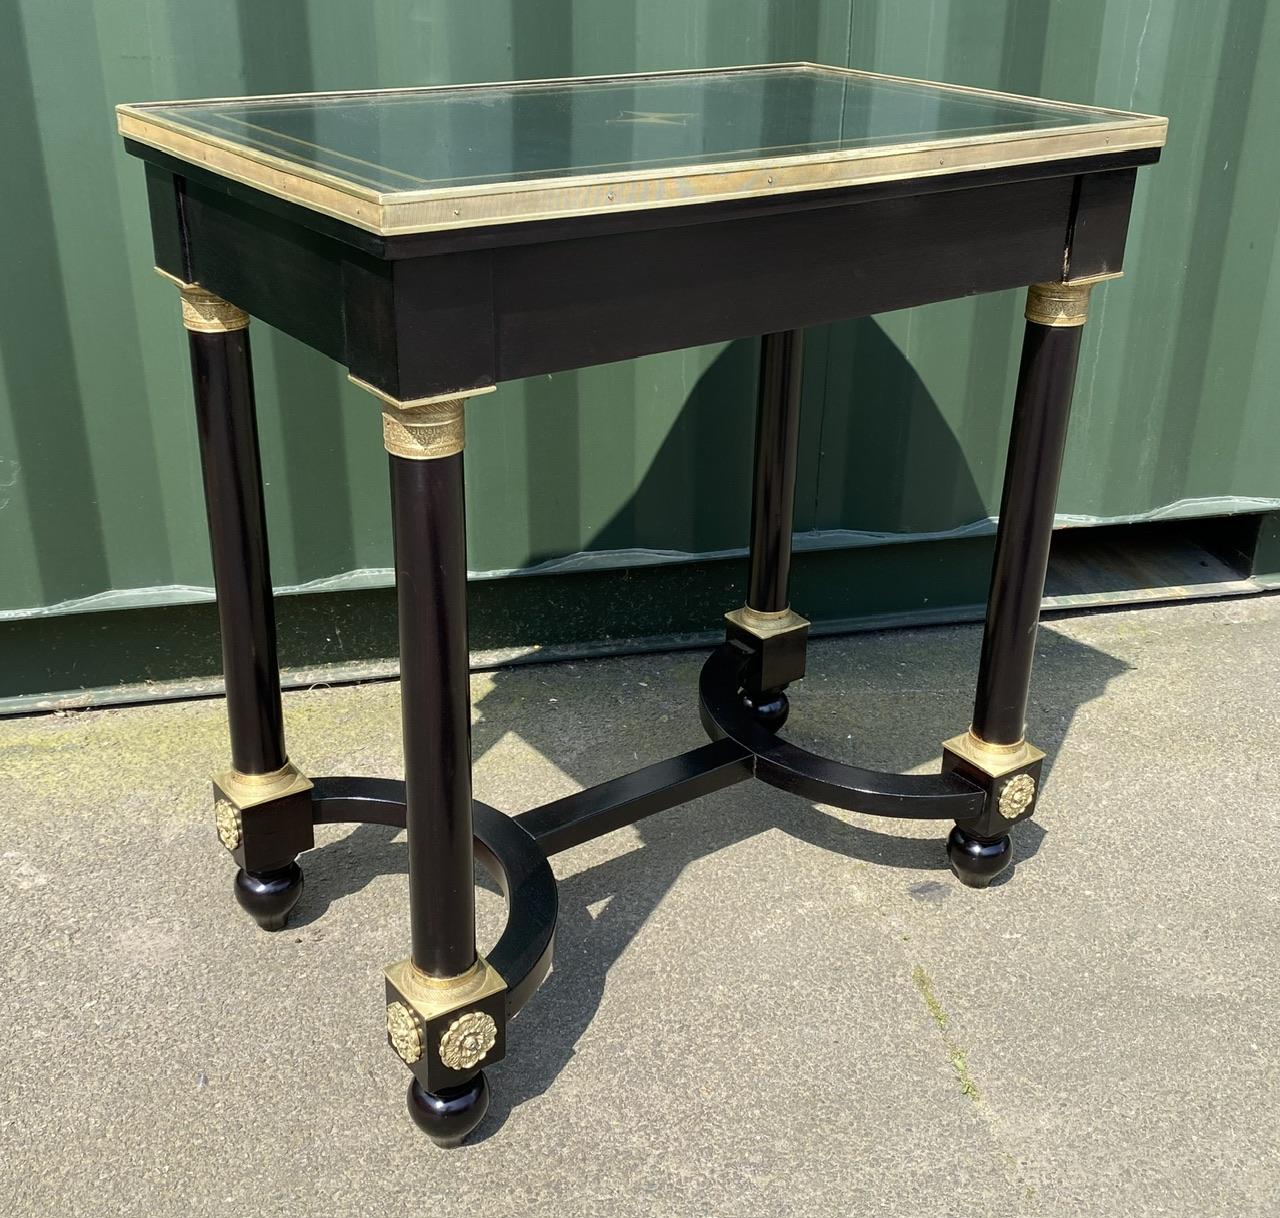 An extremely fine quality French Louis XVI design piece of furniture. Made from Mahogany which is ebonised and having very well cast ormolu brass detailing, the top has a gold painted design with a glass top which is incased by the brass edging. The